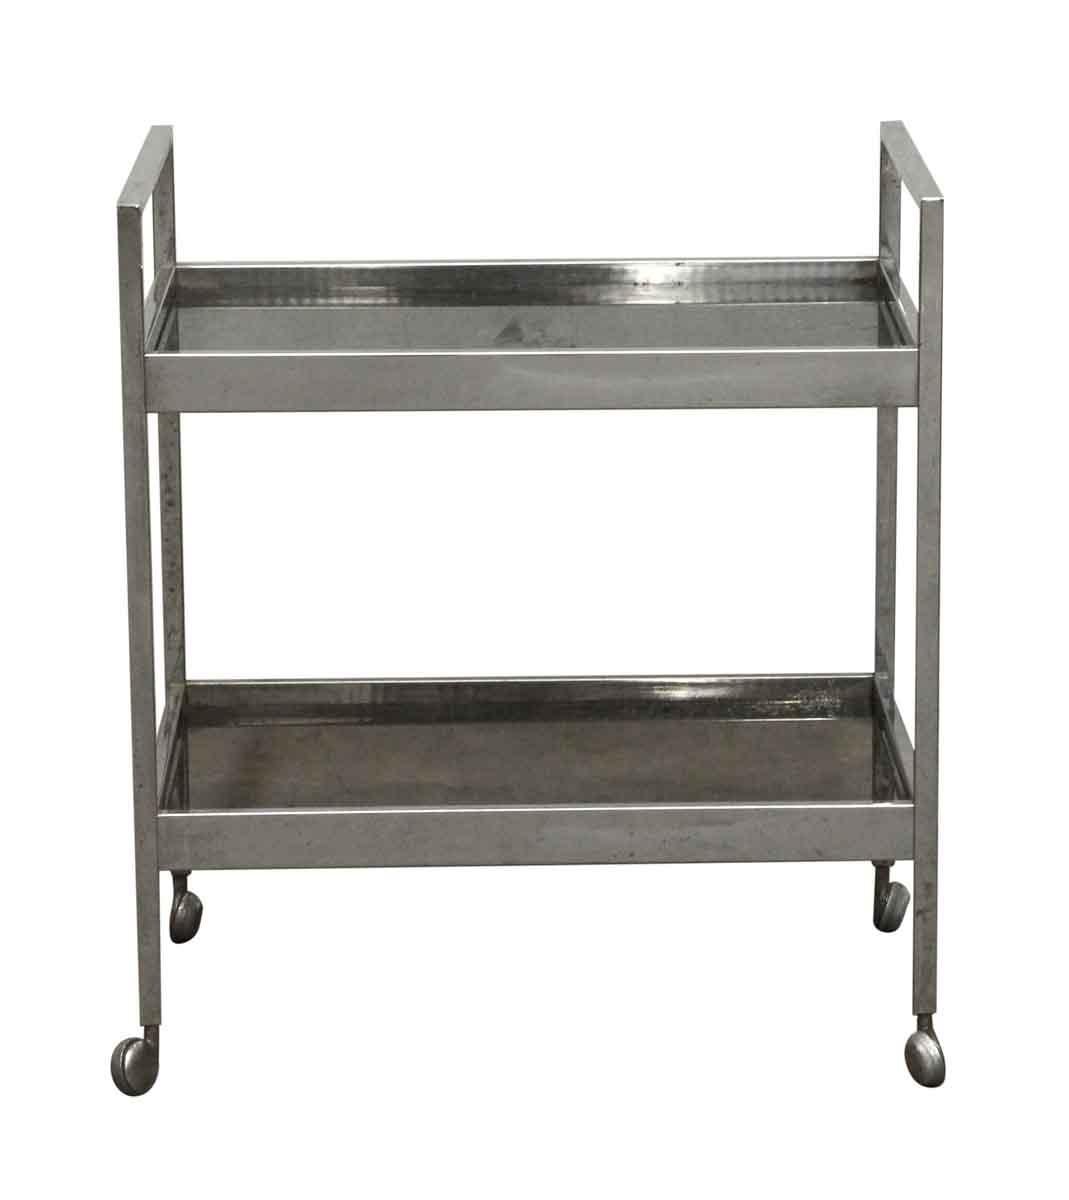 French Mid-Century Modern styling nickel-plated bar cart with two smoked glass shelves from the 1970s. Minor rust around frame. This can be viewed at our Los Angeles location. Please inquire for the exact address.